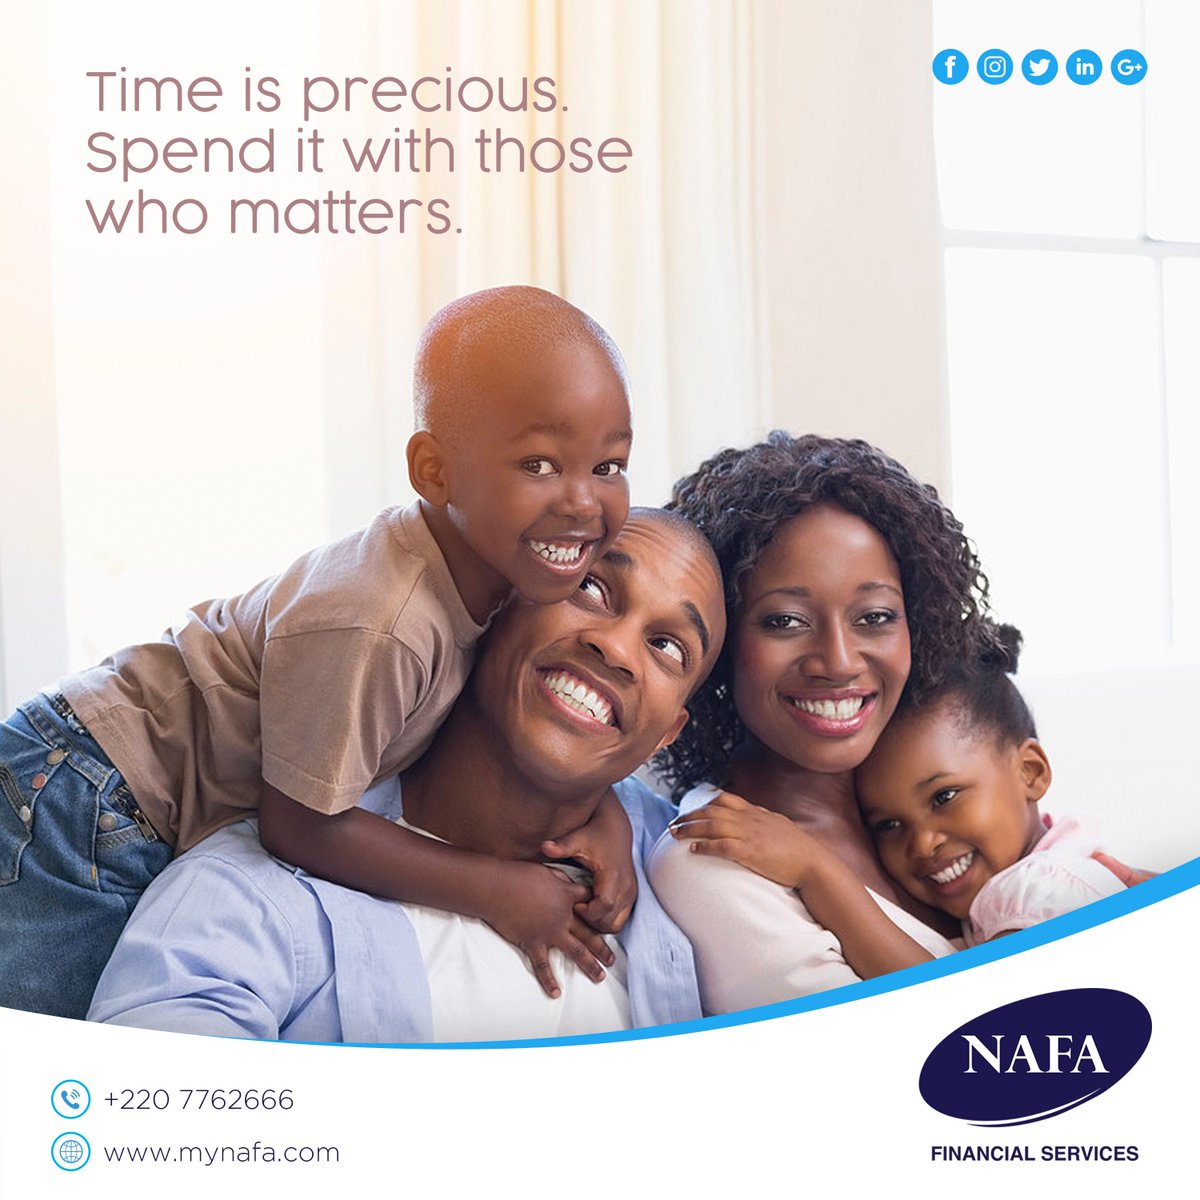 The greatest gift you can give someone is your time because when you give your time, you are giving a portion of your life that you will never get back. Happy Sunday!

#Sunday #MyNafa #NafaGambia #CustomerFirst #NafaFinancialServices #SendMoney #ReceiveMoney #Gambia #ChooseNafa